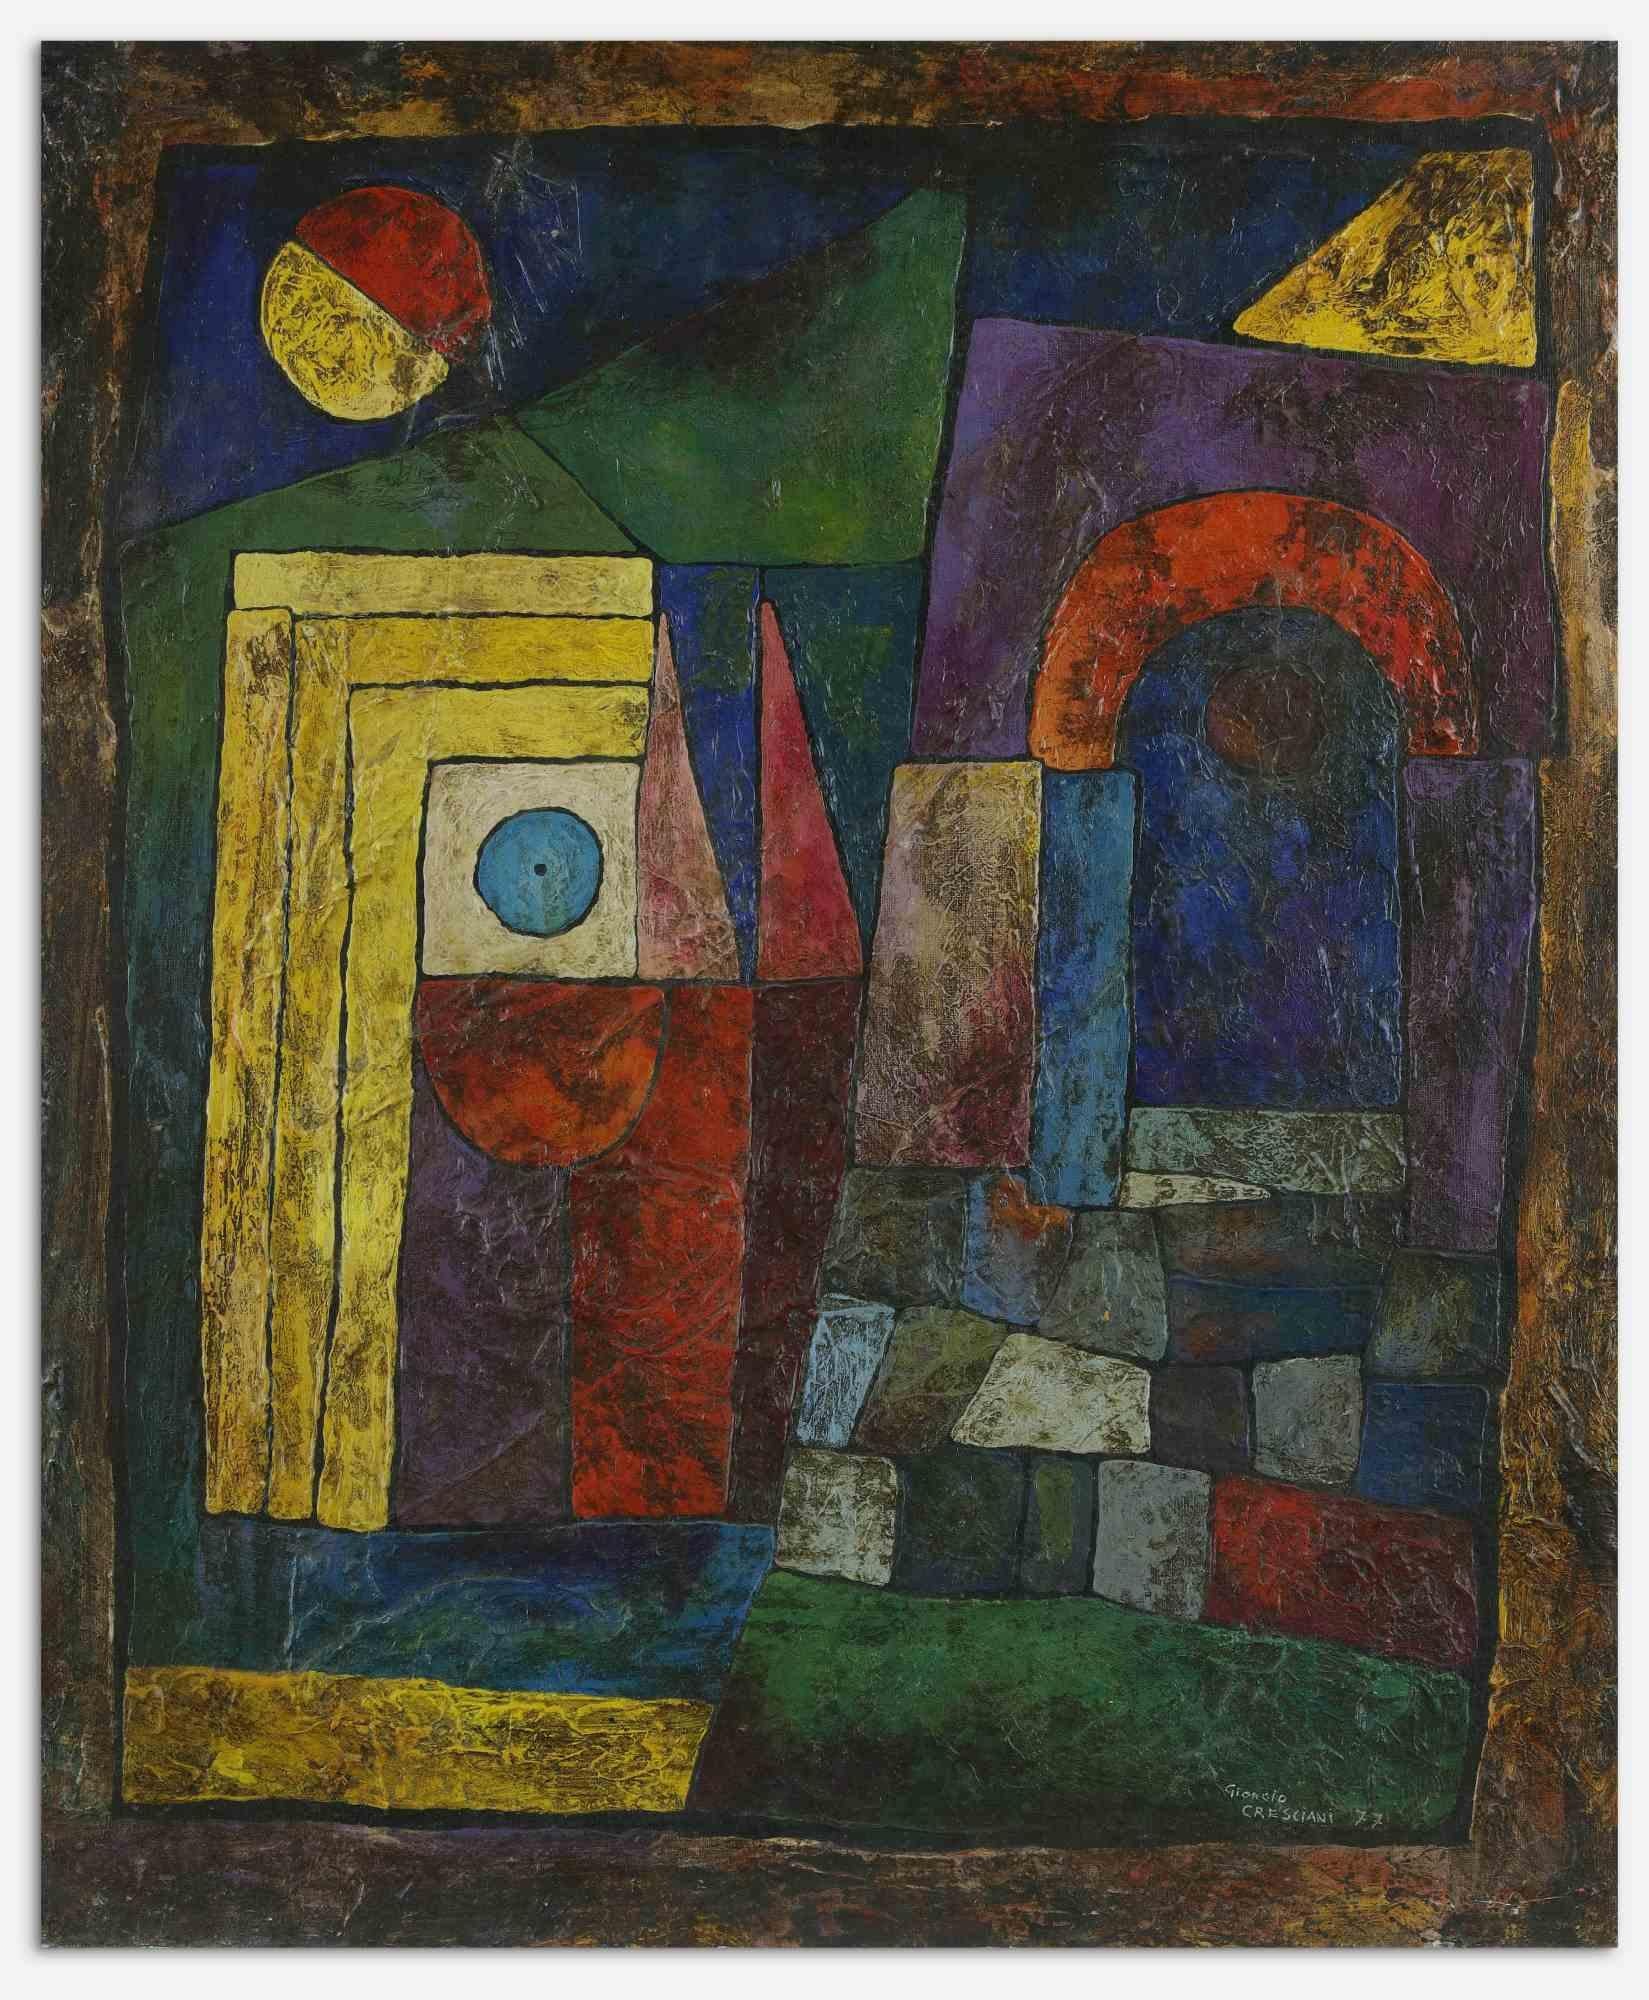 Hommage to Paul Klee - Painting by Giorgio Cresciani - 1977